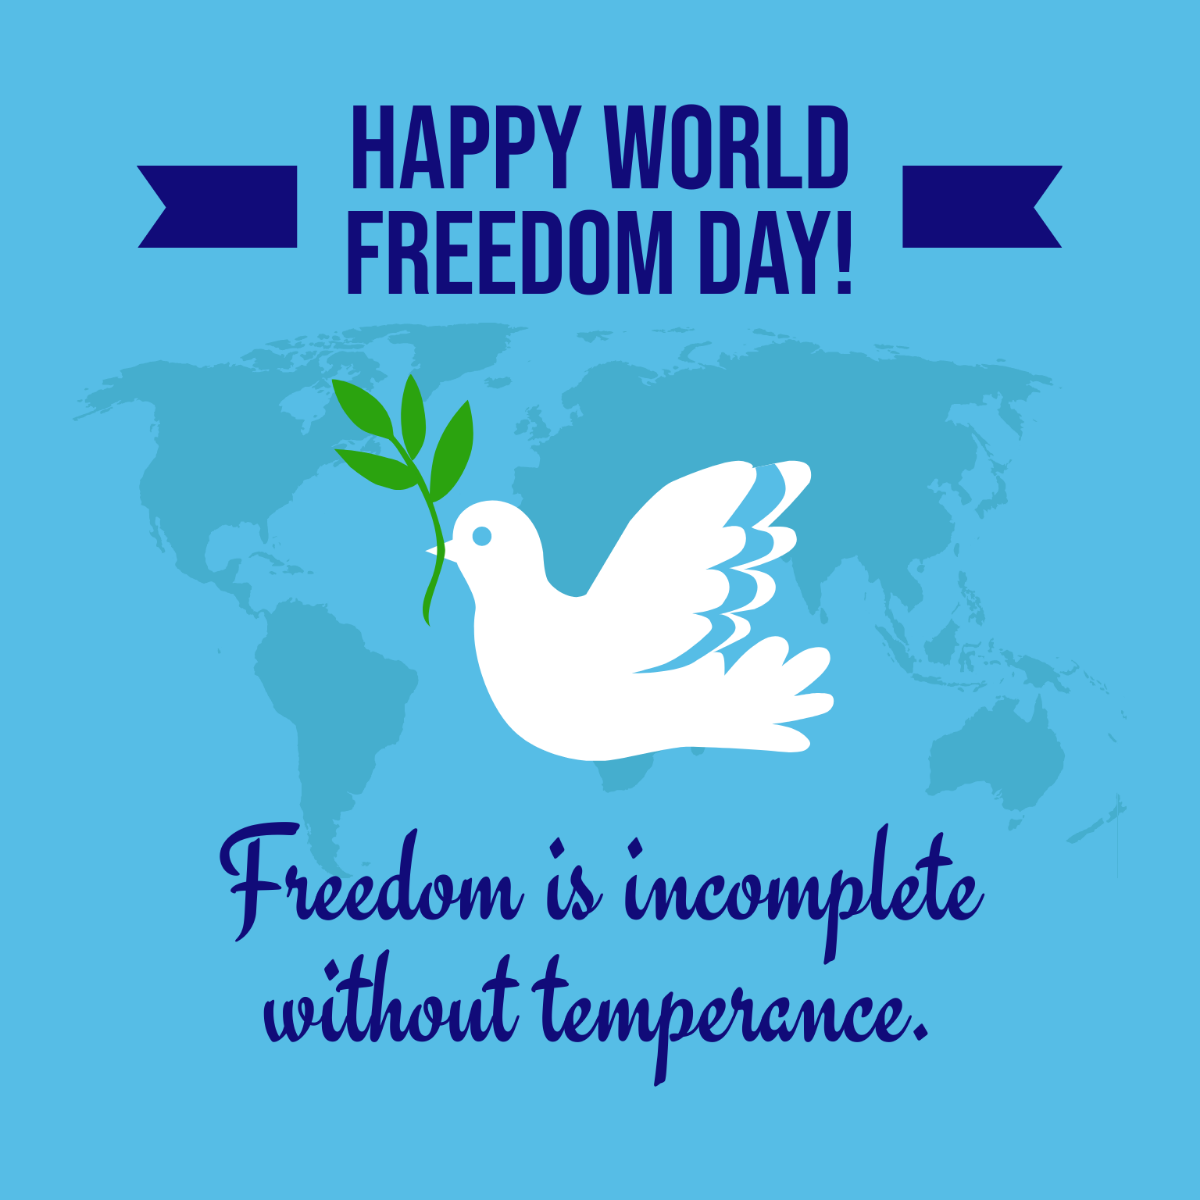 World Freedom Day Greeting Card Vector Template